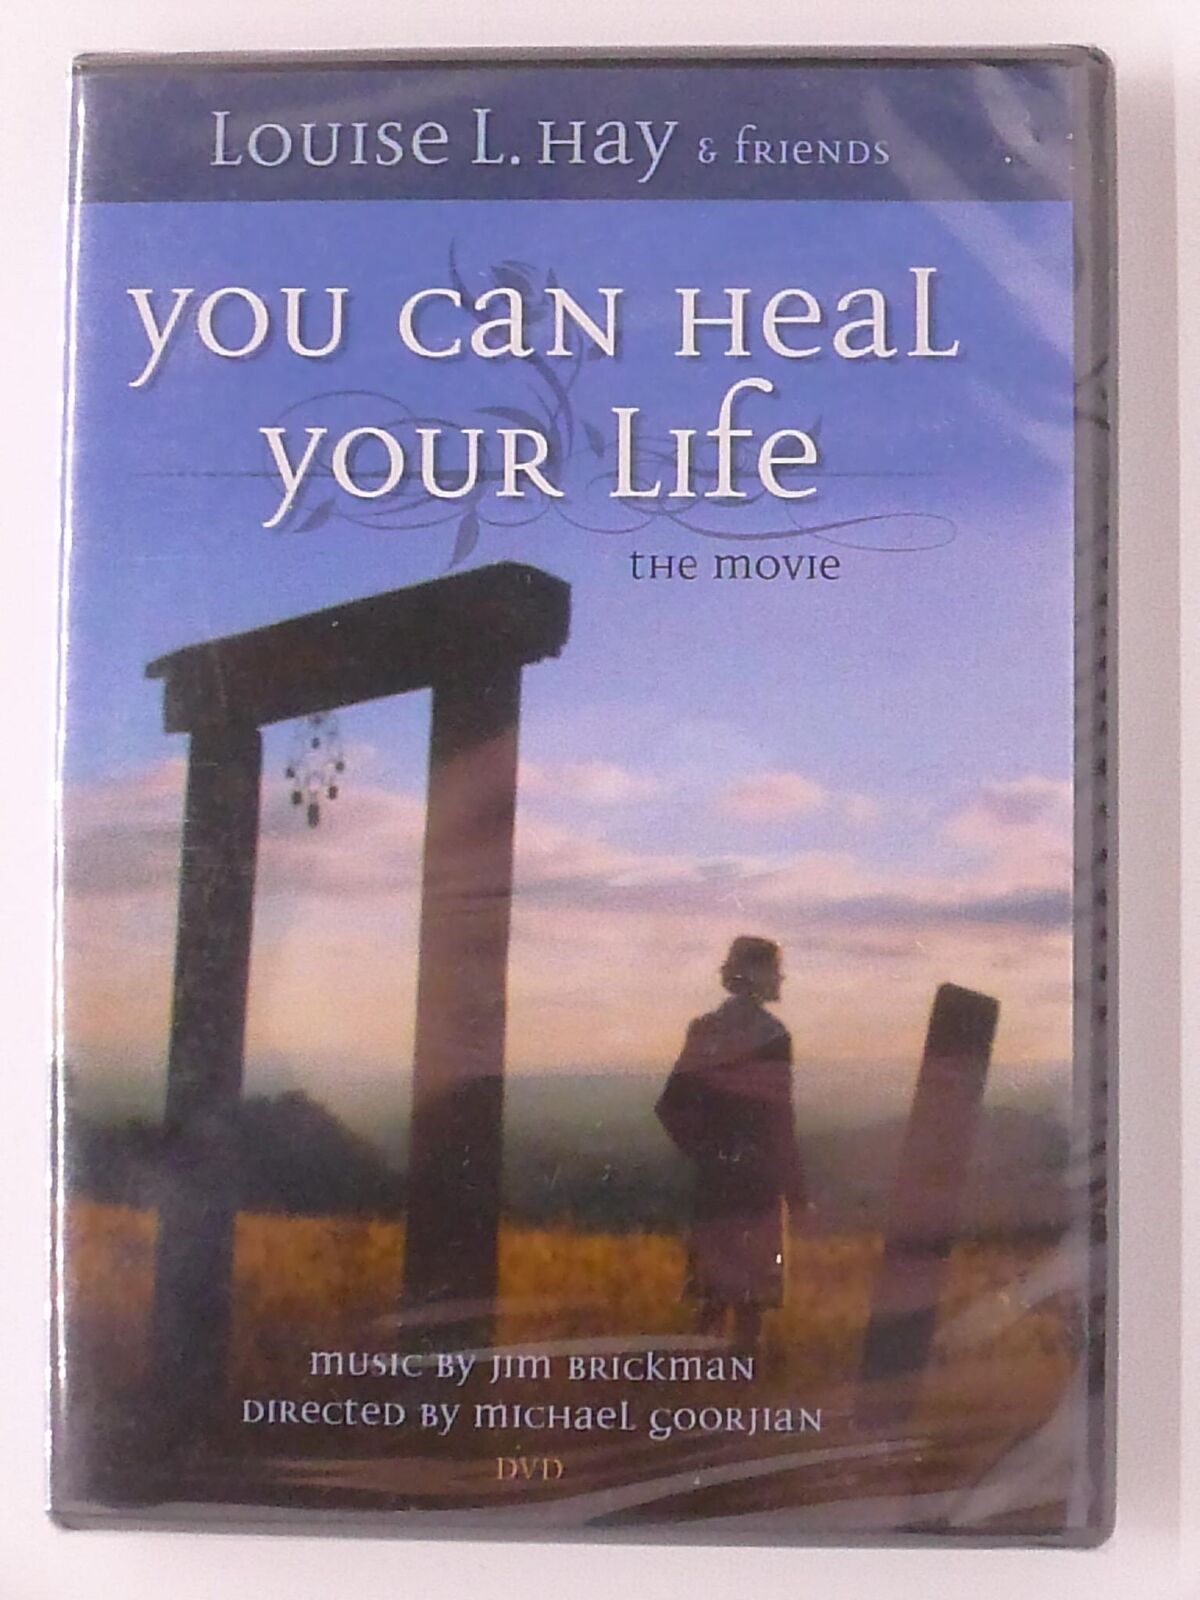 You Can Heal Your Life, the Movie (DVD, Louise L. Hay and Friends) - J1105